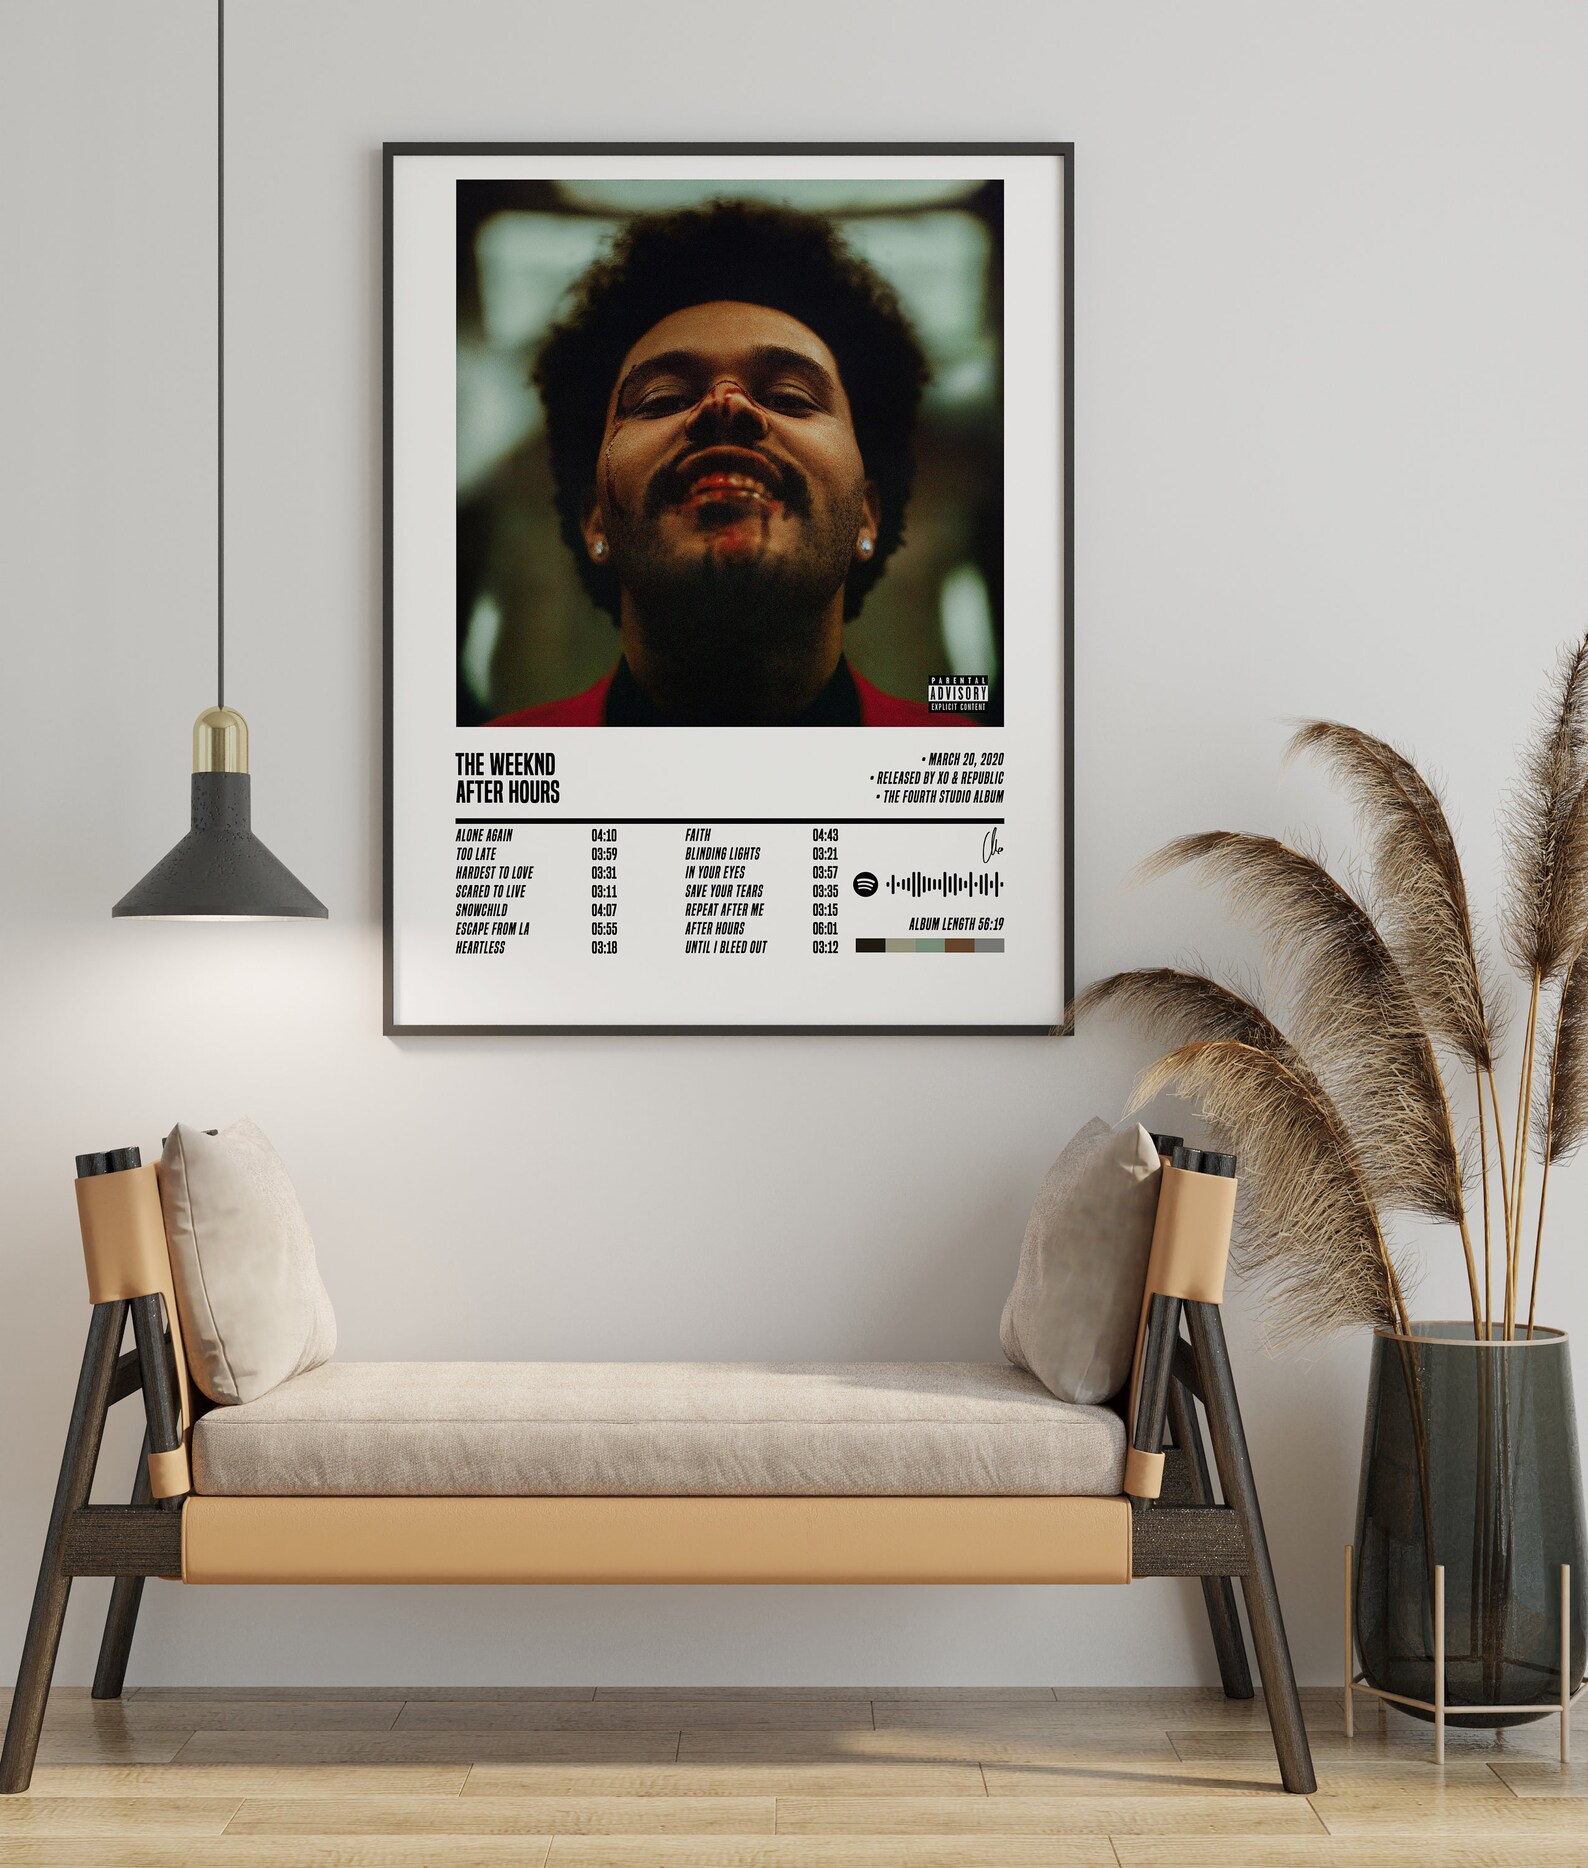 The Weeknd After Hours Poster After Hours Playlist Poster | Etsy